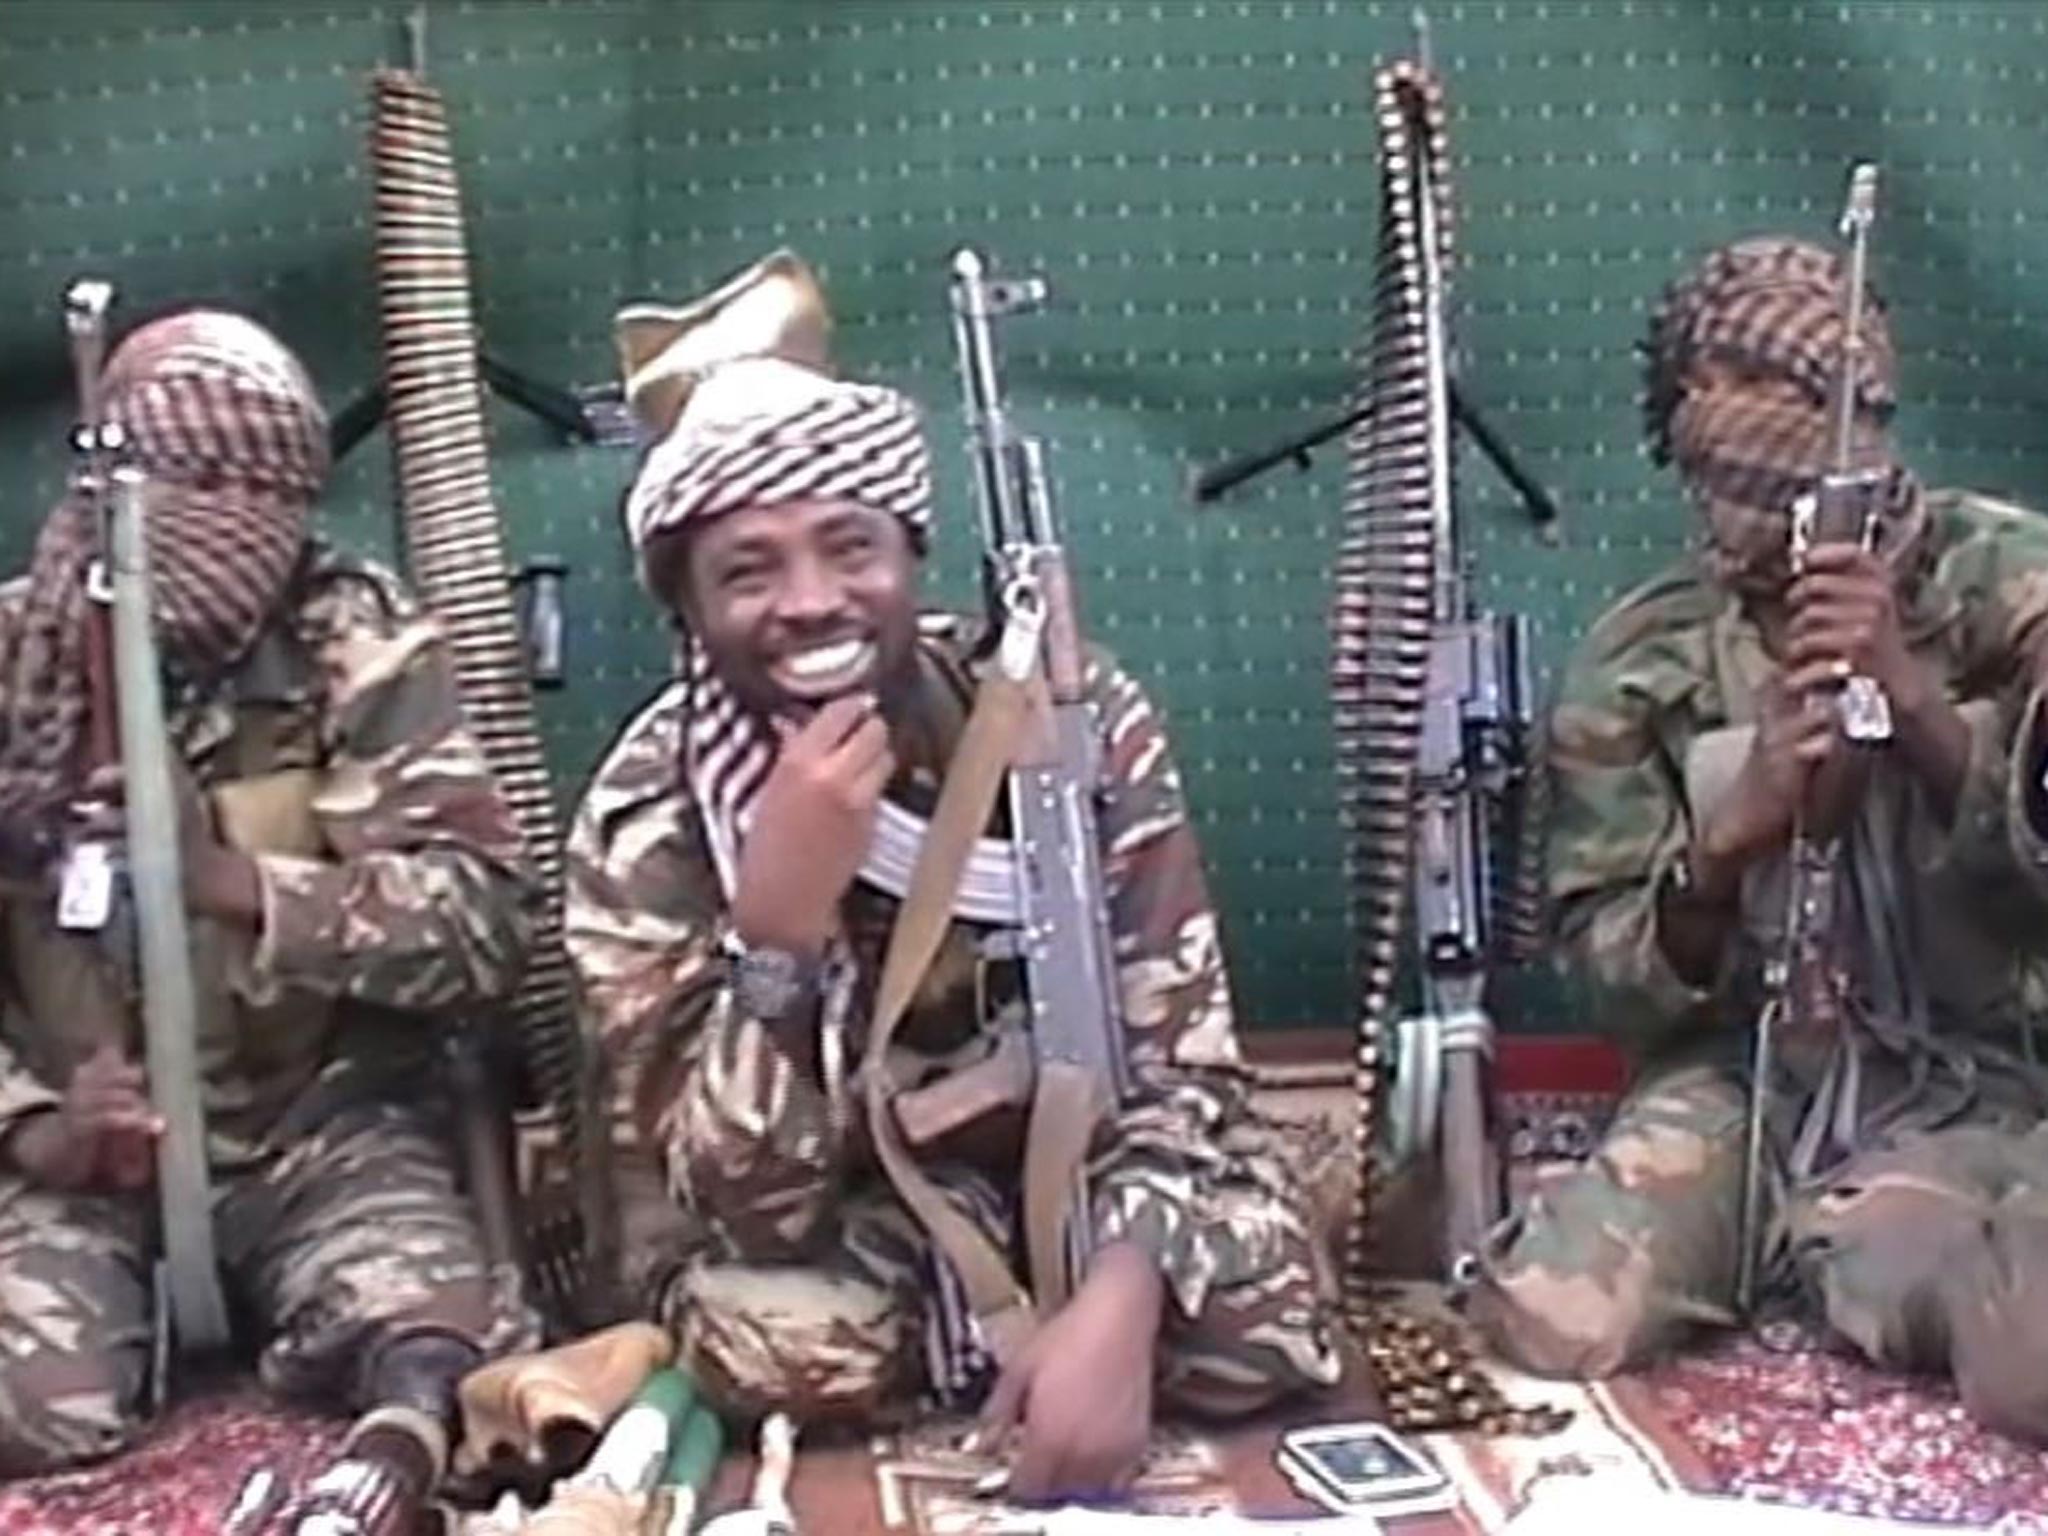 A video released by Boko Haram last year shows a man purporting to be Abubakar Shekau, the group’s leader, taunting world leaders